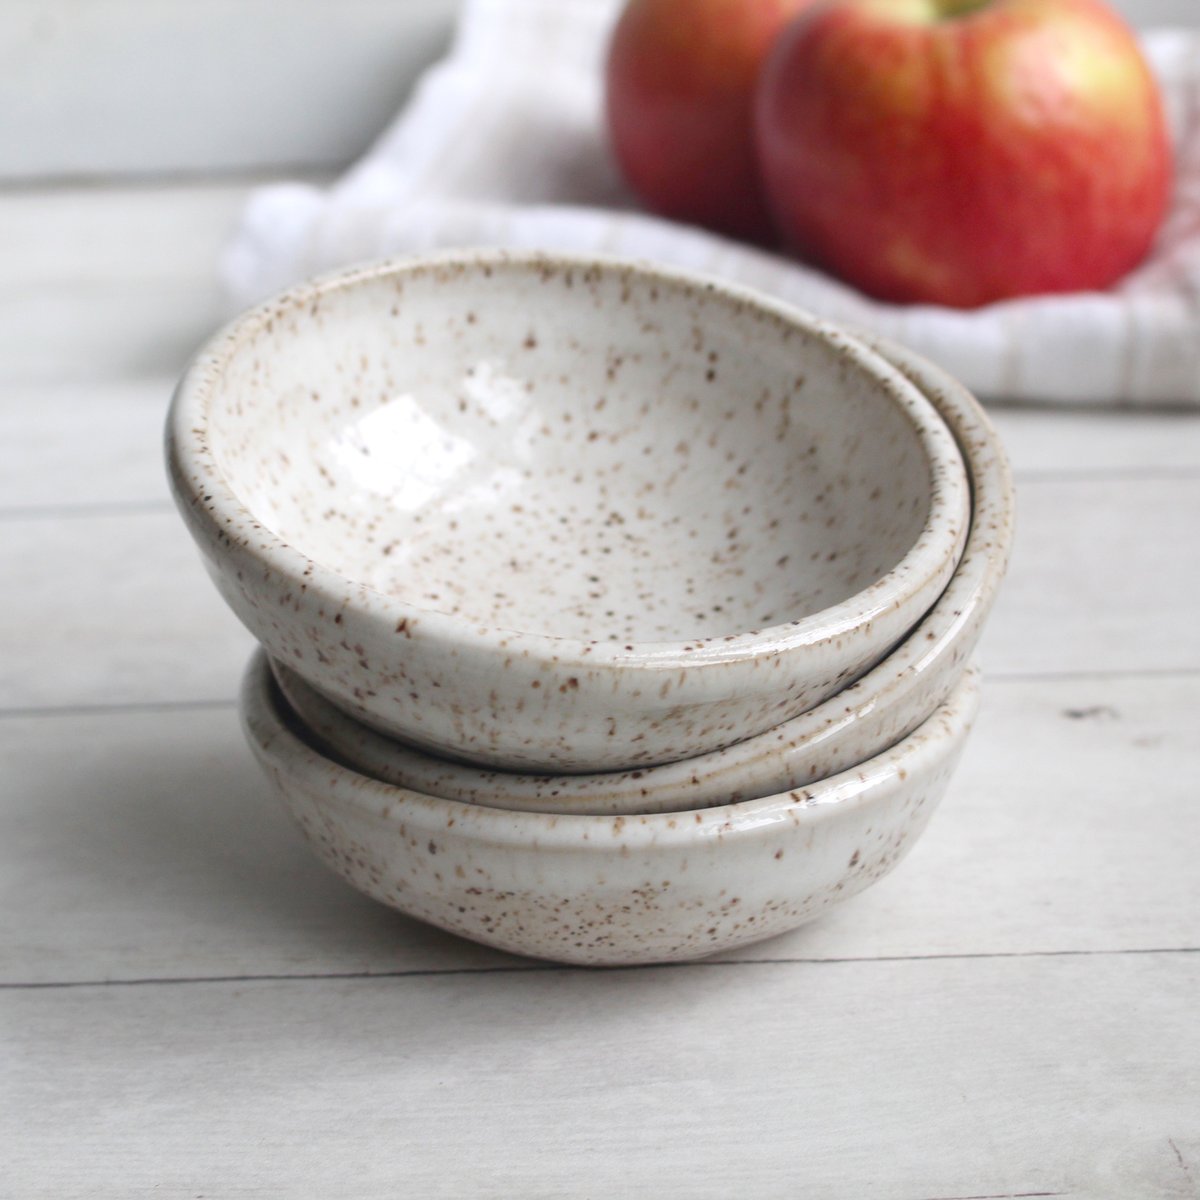 Andover Pottery — Three Rustic Prep Bowls in Toasted Marshmallow Glaze,  Handcrafted Small Bowls, Made in the USA